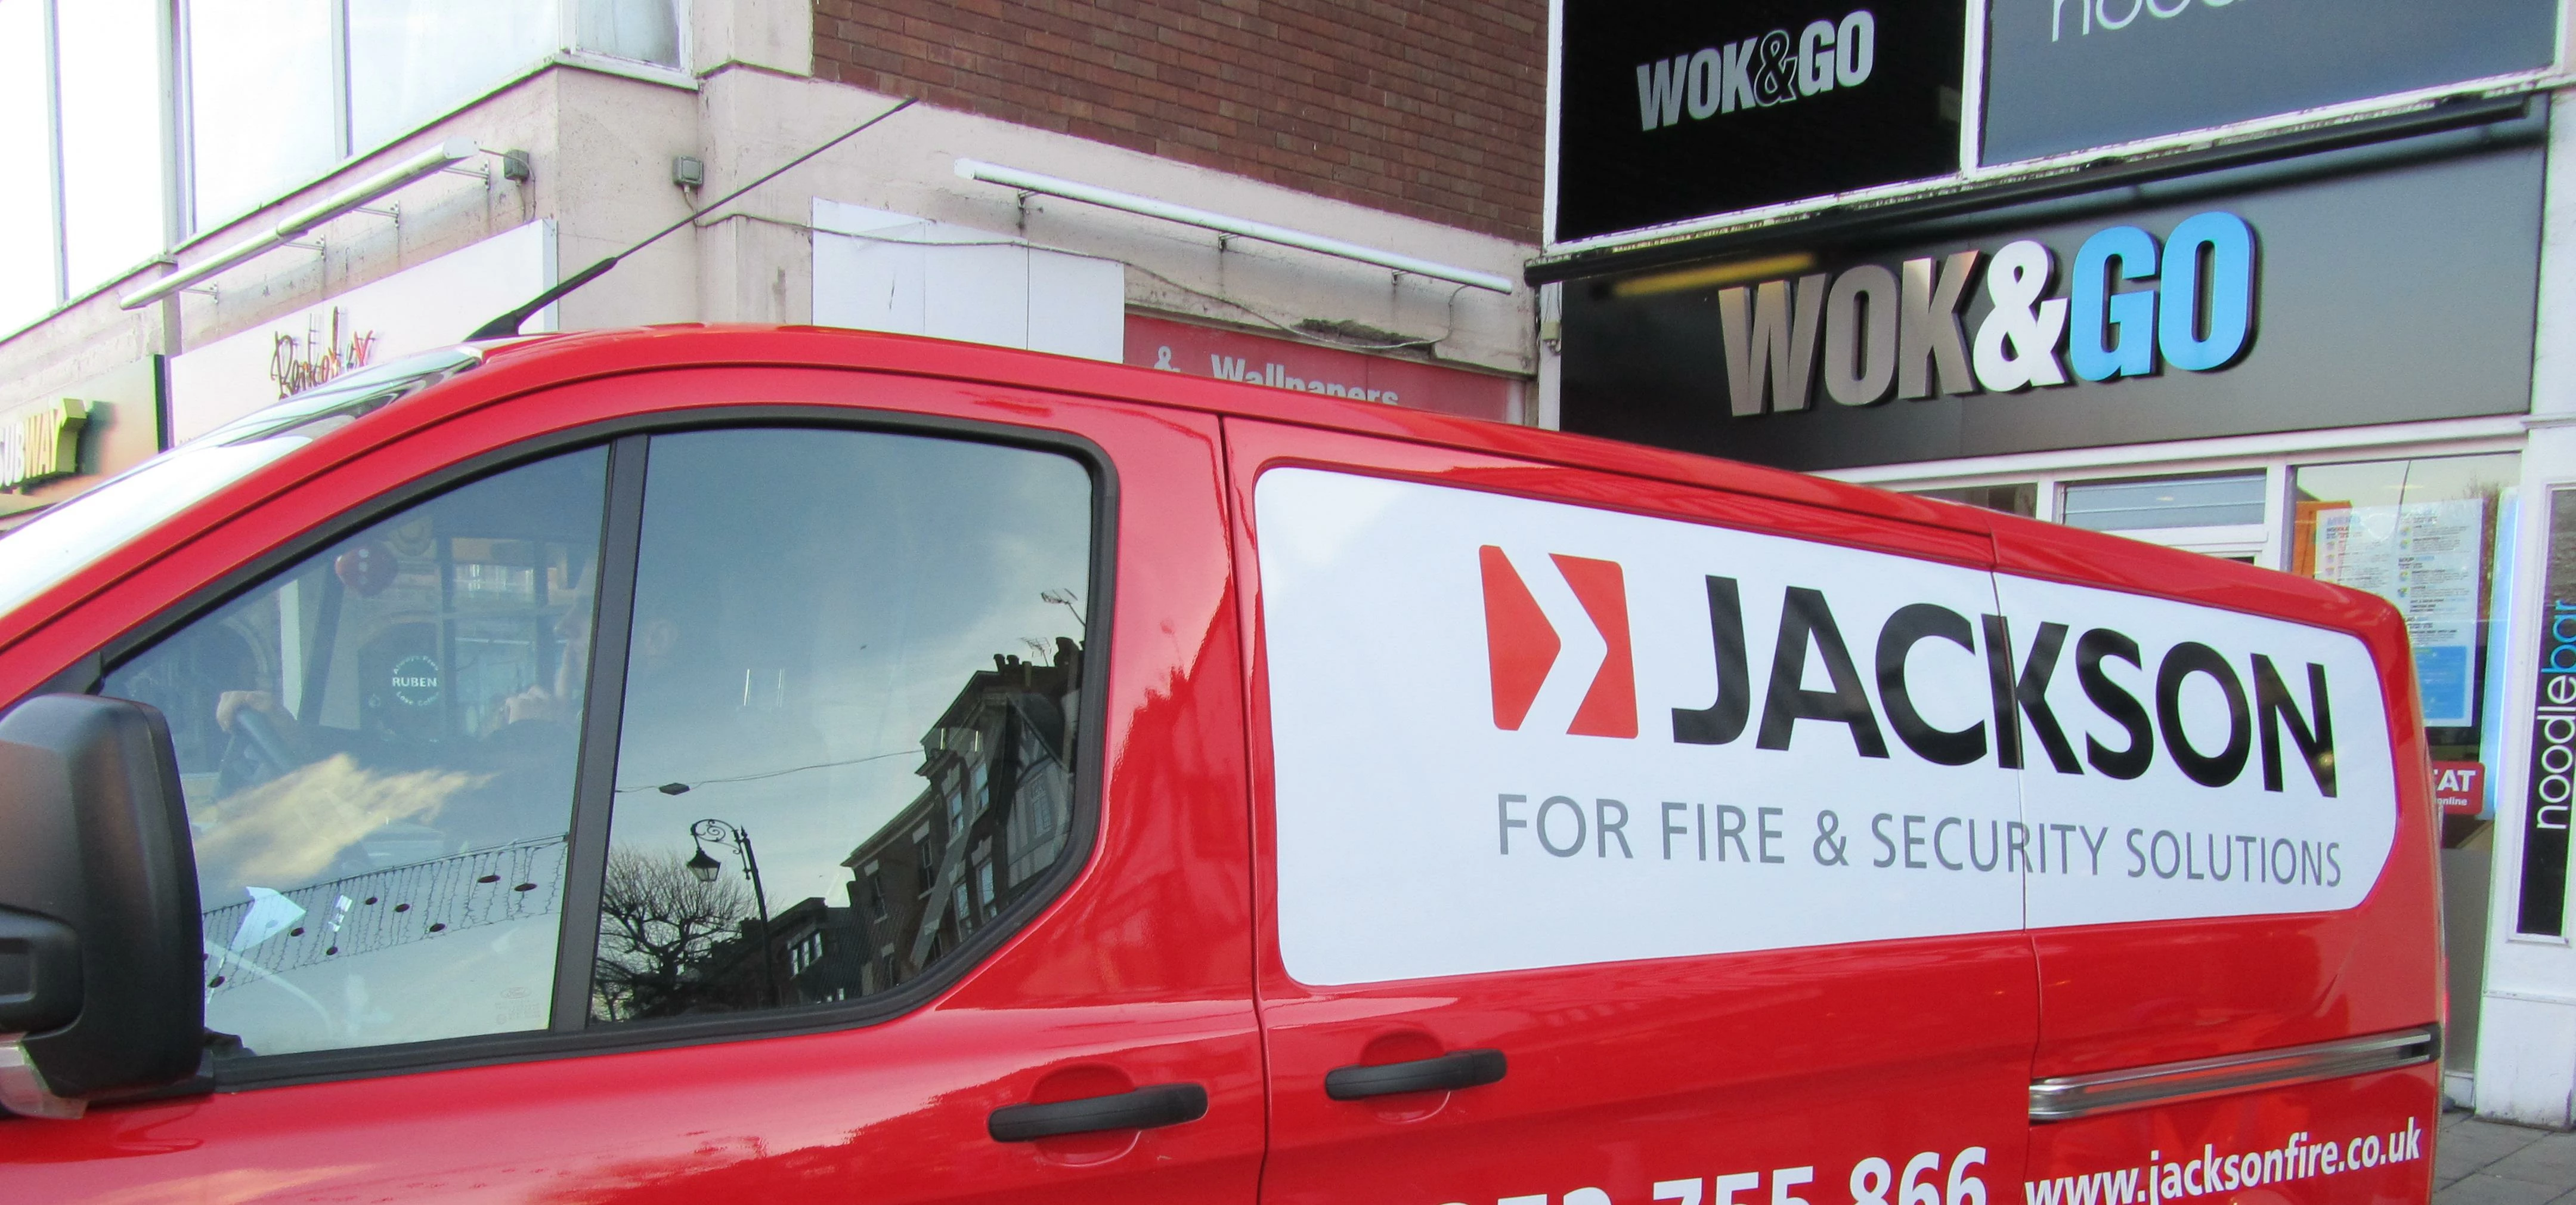 Jackson Fire carrying out maintenance at Wok & Go Chester 